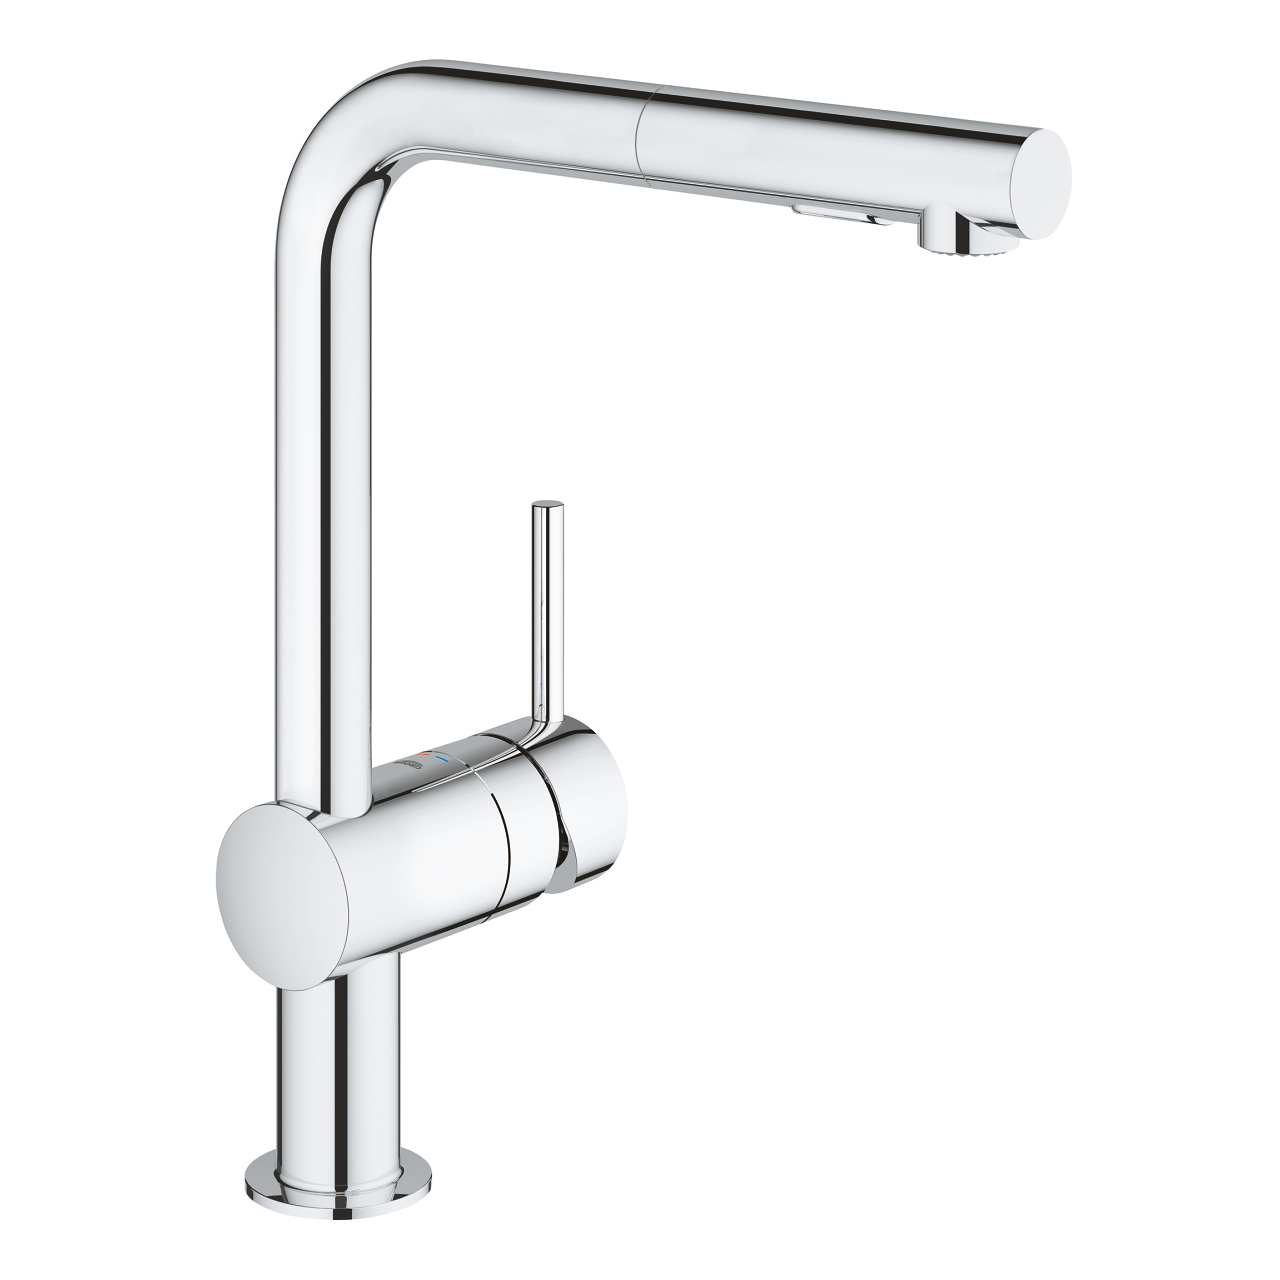 Baterie bucatarie Grohe Minta cu dus extractibil dual spray pipa L crom baterie